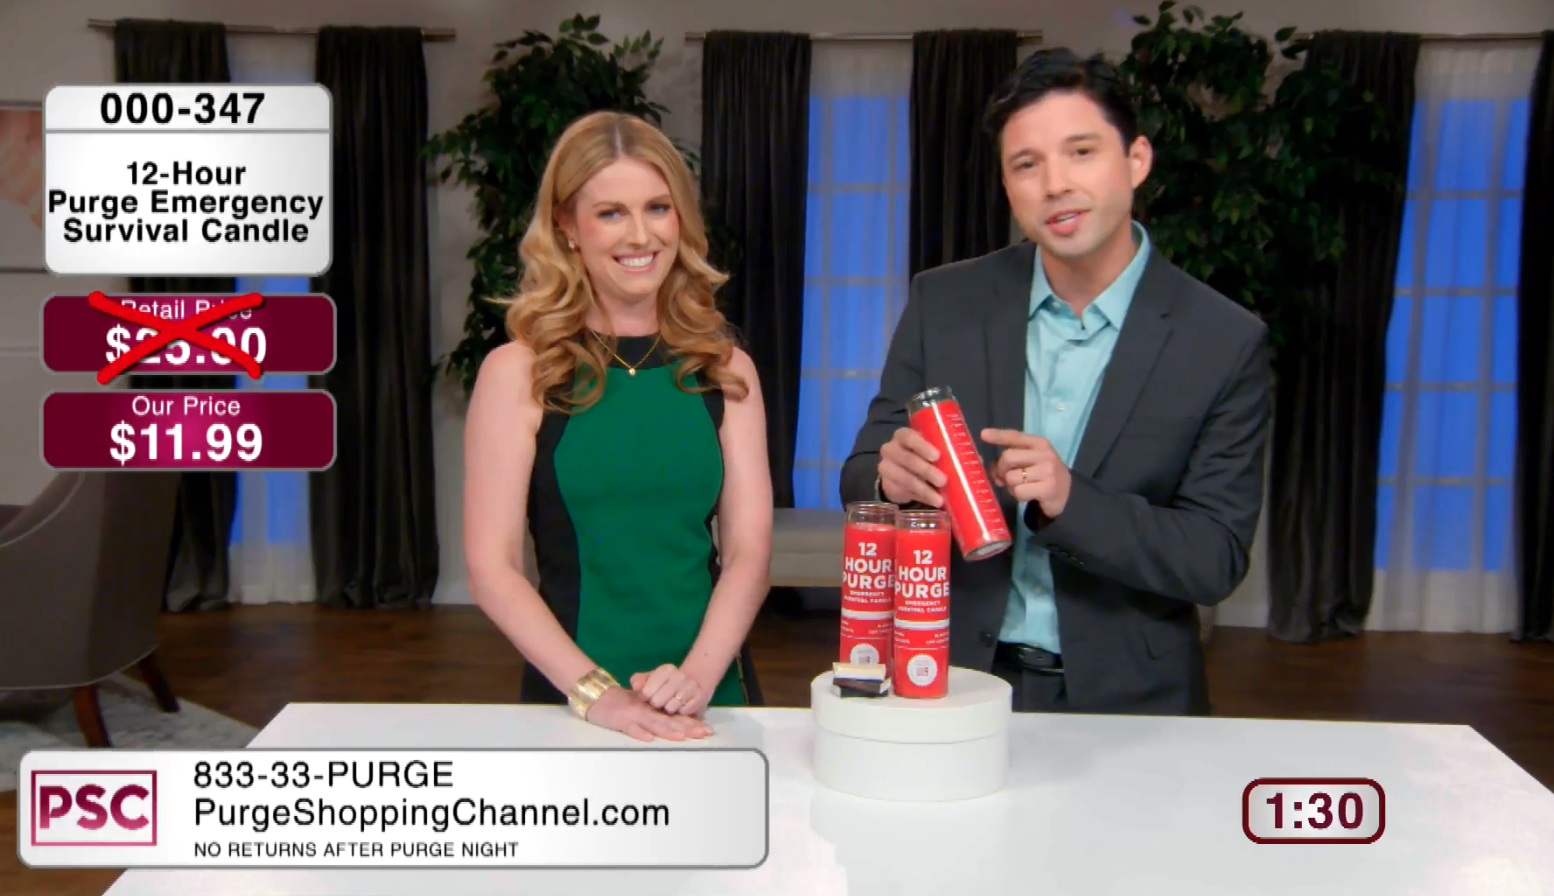  The Purge Home Shopping Channel Launched In Unique 